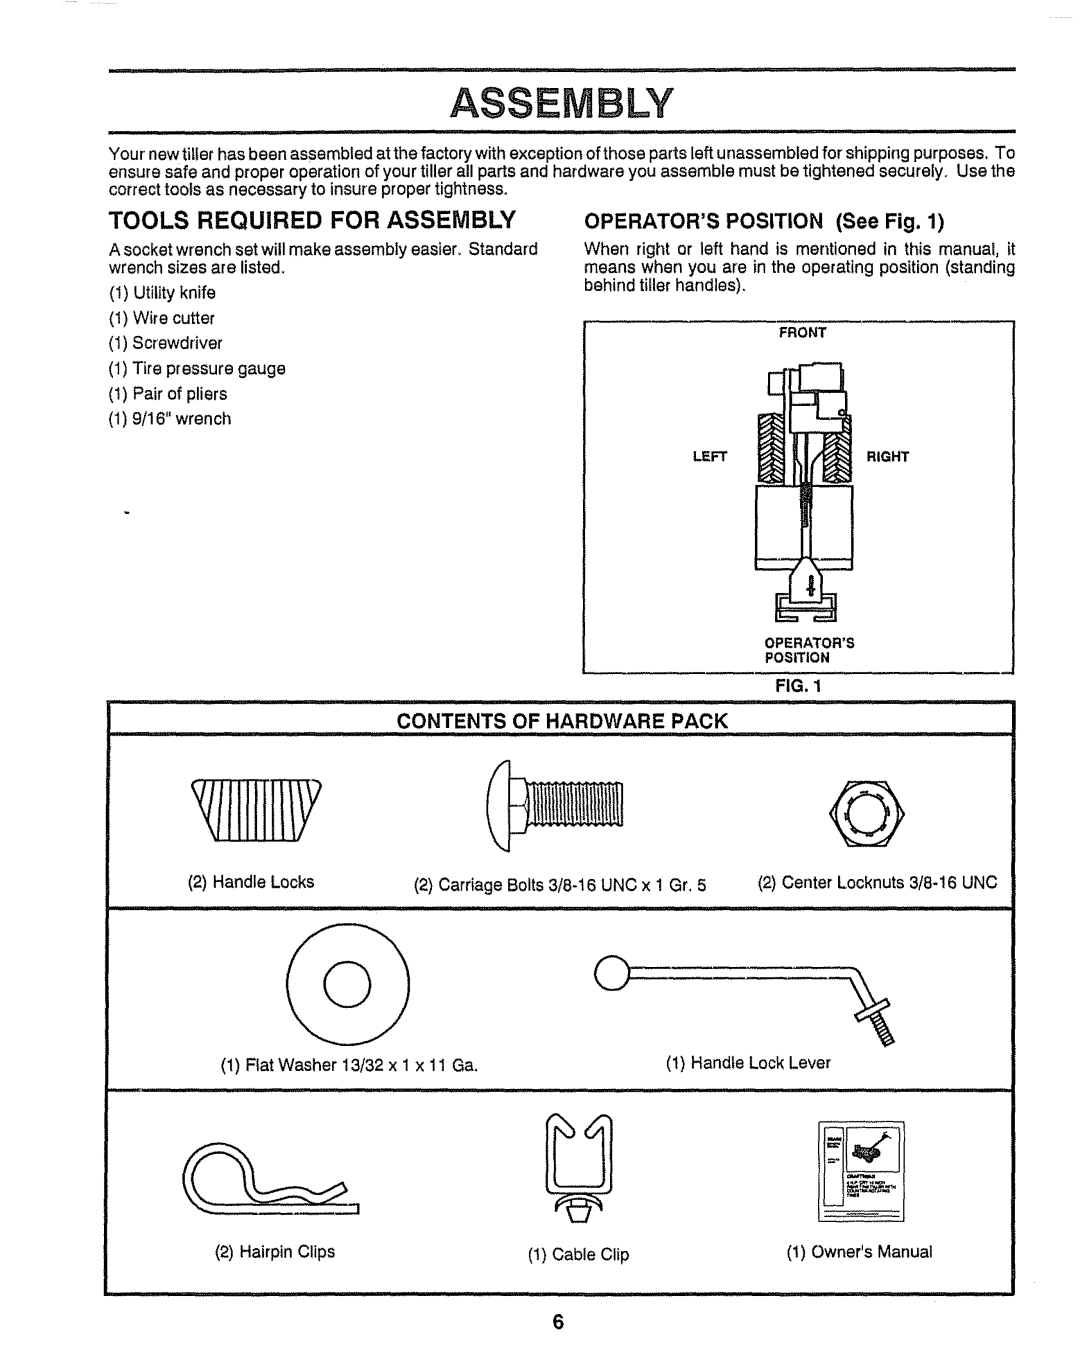 Craftsman 917.29555 manual Tools Required For Assembly, OPERATORS POSITION See Fig, tIIIHI/Y 